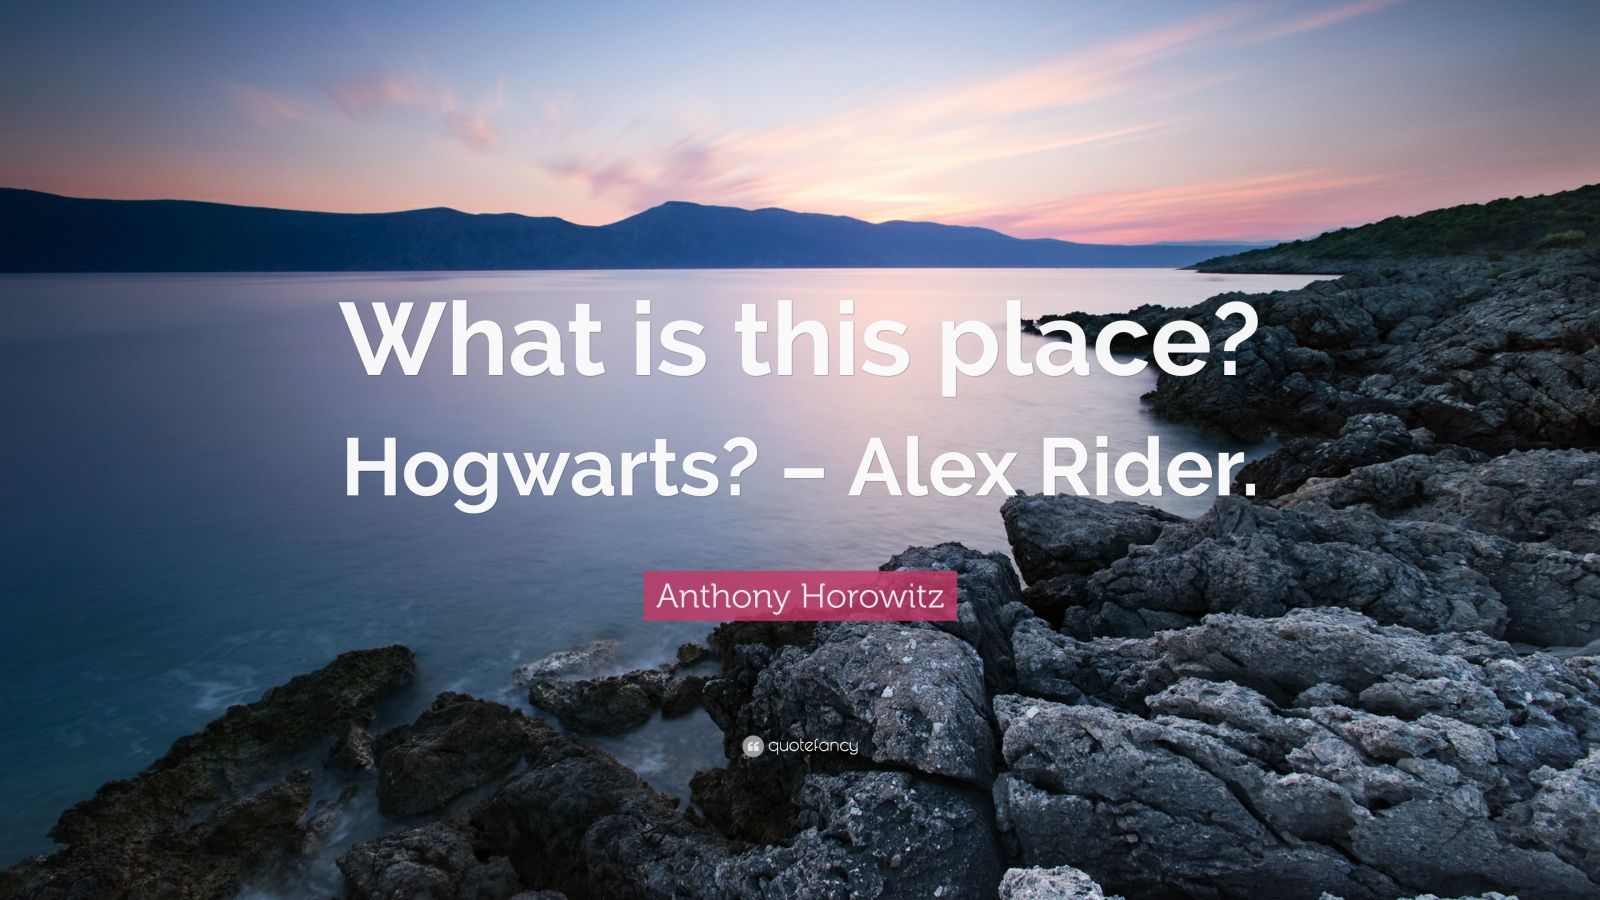 Anthony Horowitz Quote: “What is this place? Hogwarts?